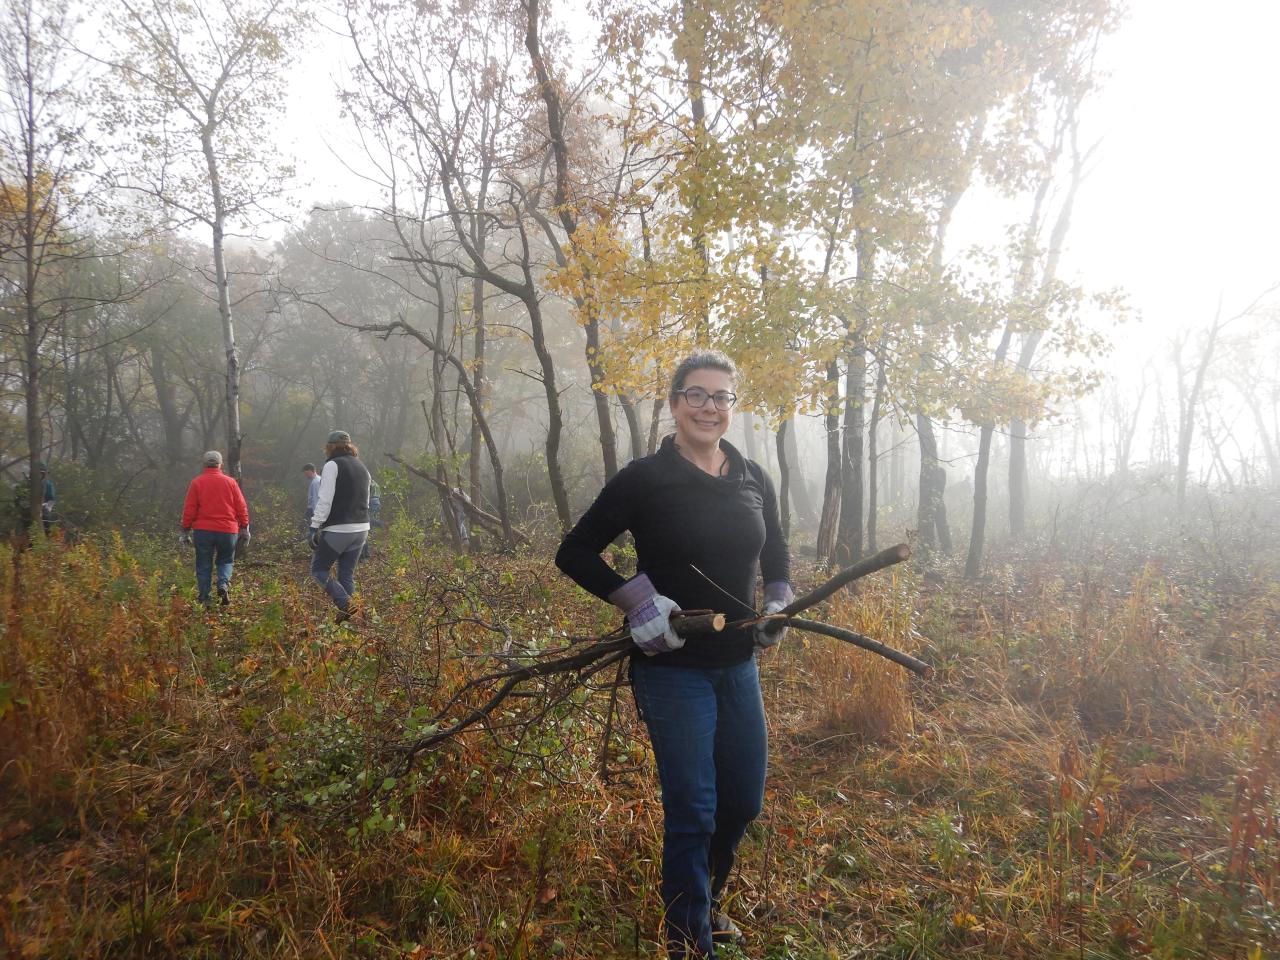 Volunteer Esther hauls brush at the 2021 event